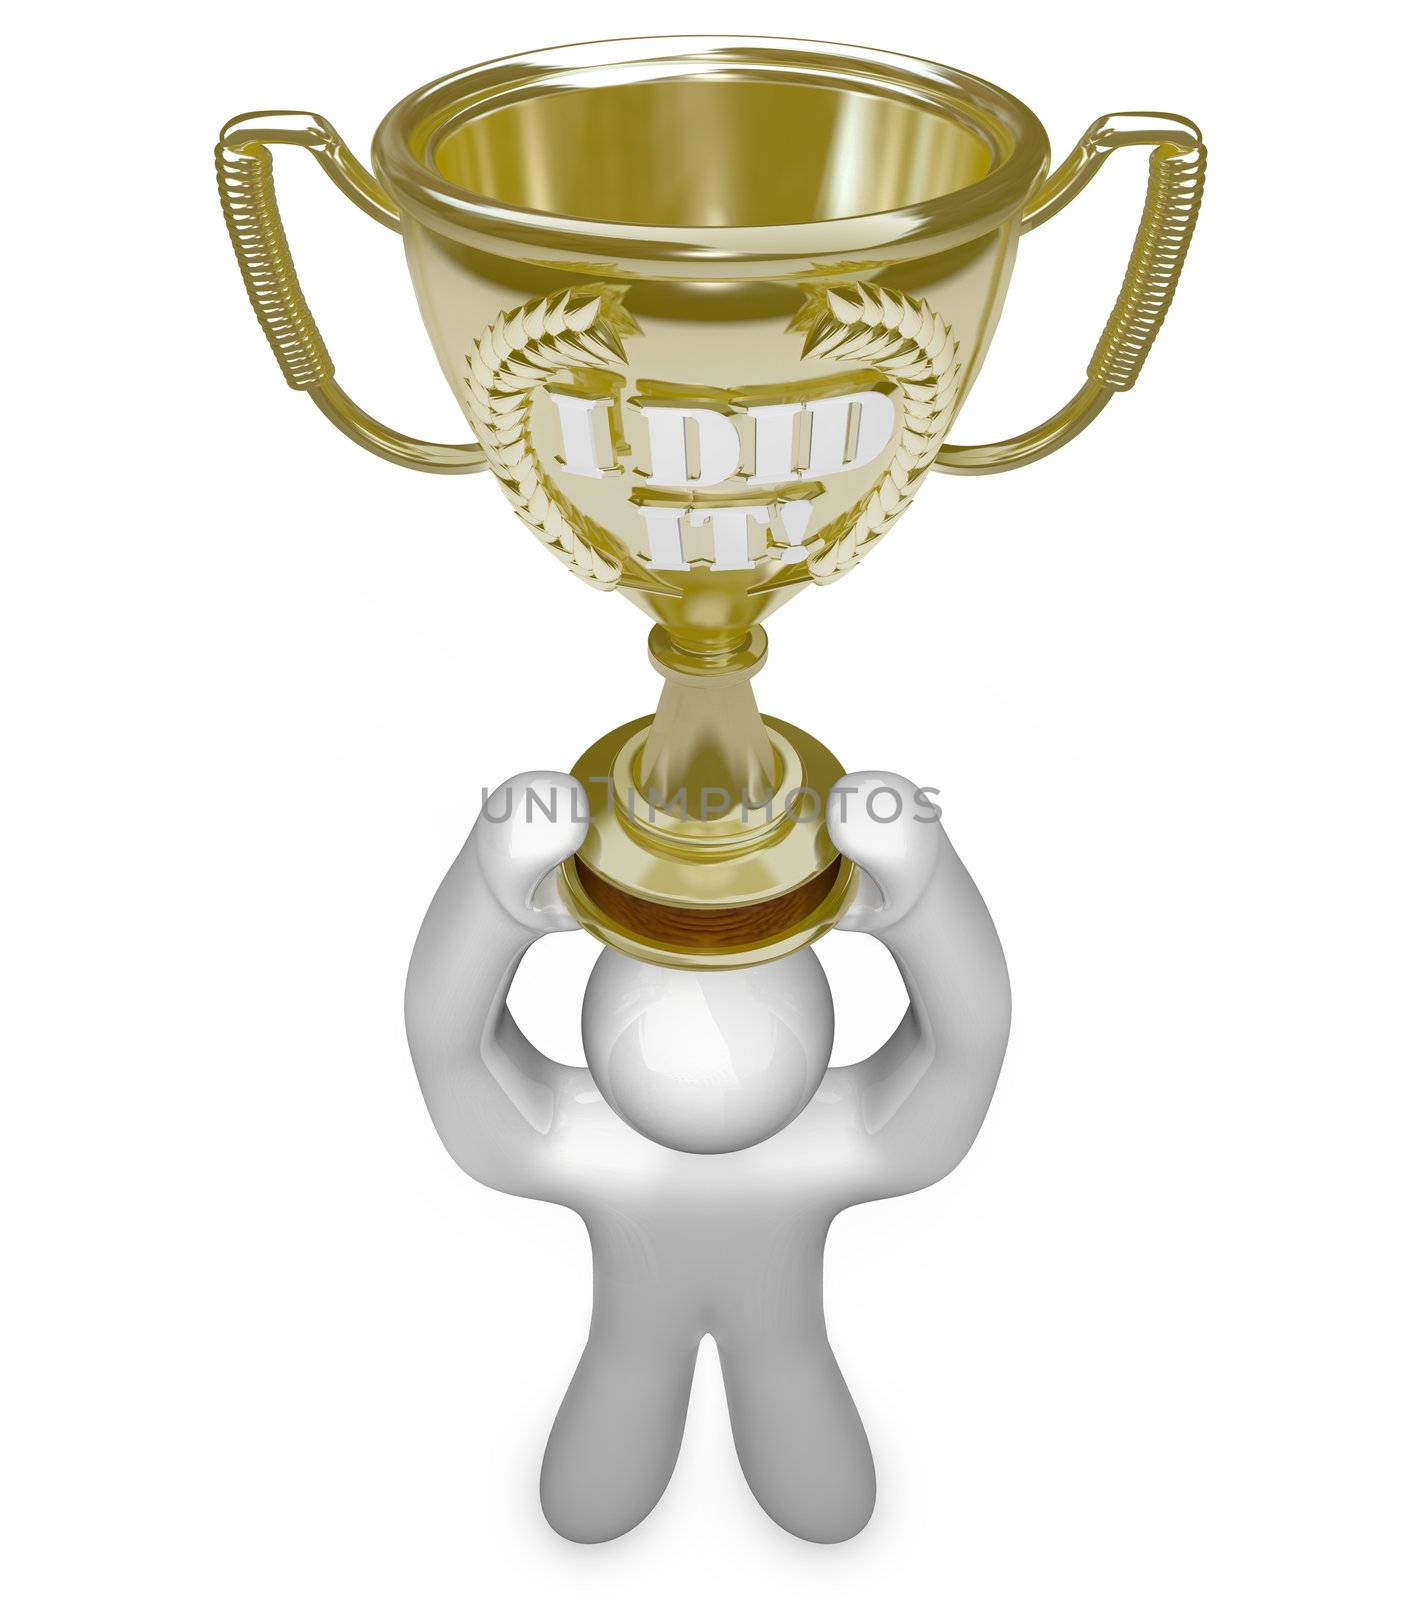 Man Holding Trophy - I Did It by iQoncept